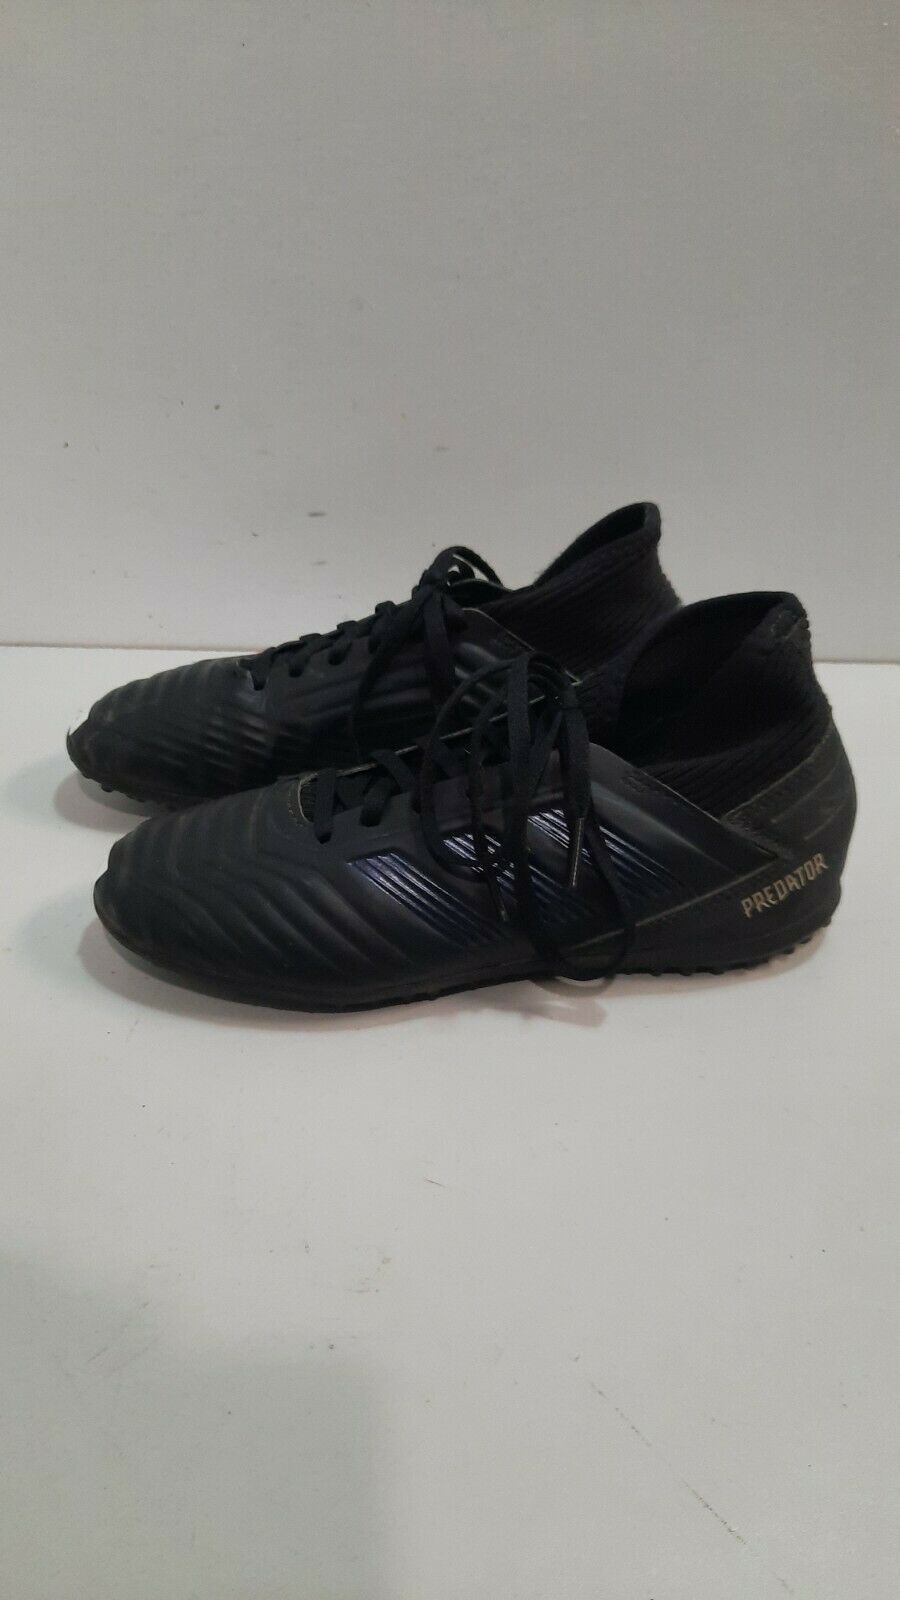 Adidas Predator Turf Cleats Size 4.5 Color Black Condition Used